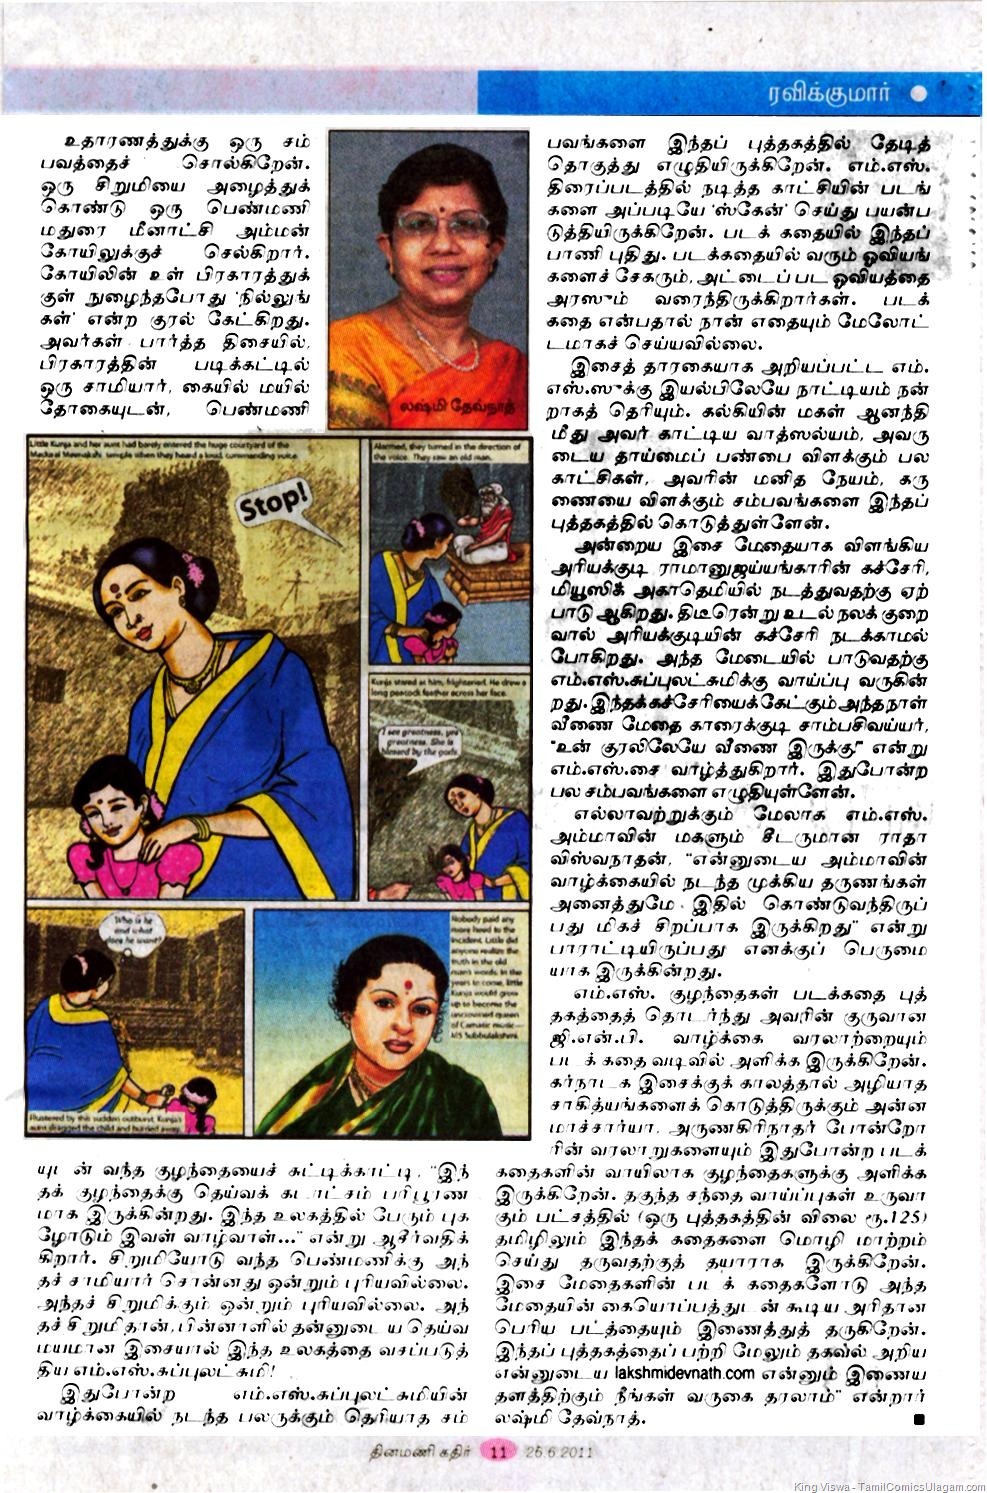 [DinaMani%2520Kathir%2520Weekly%2520Supplement%2520to%2520Tamil%2520Daily%2520Dinamani%2520Dated%252026062011%2520Page%252002%255B4%255D.jpg]